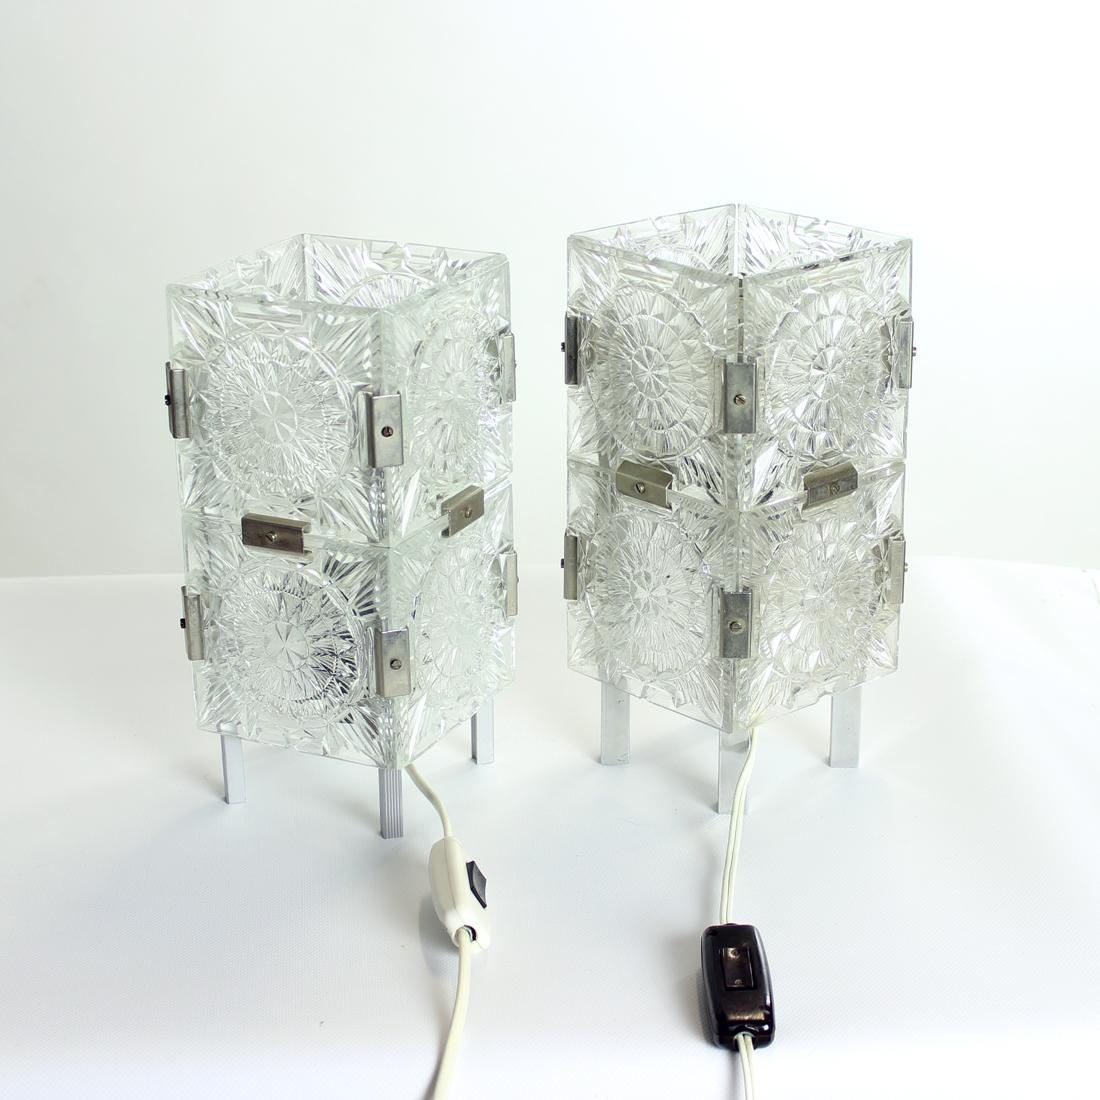 Vintage Pair of Table Lamps by Kamenicky Senov, Czechoslovakia, 1970s For Sale 2